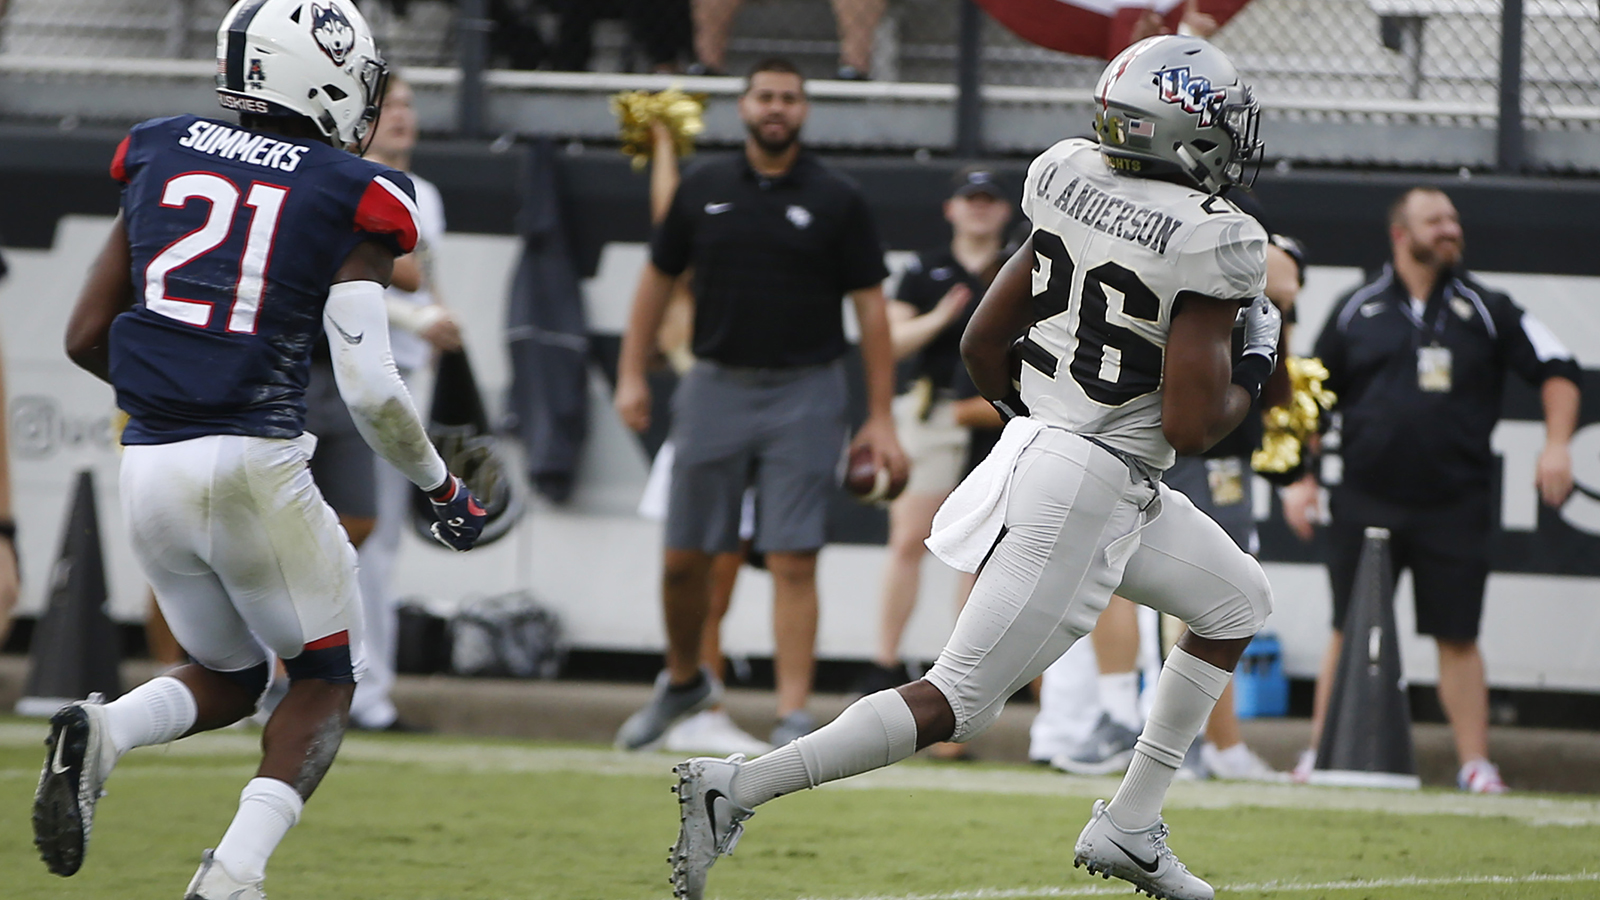 Otis Anderson helps UCF pull away from UConn to remain undefeated